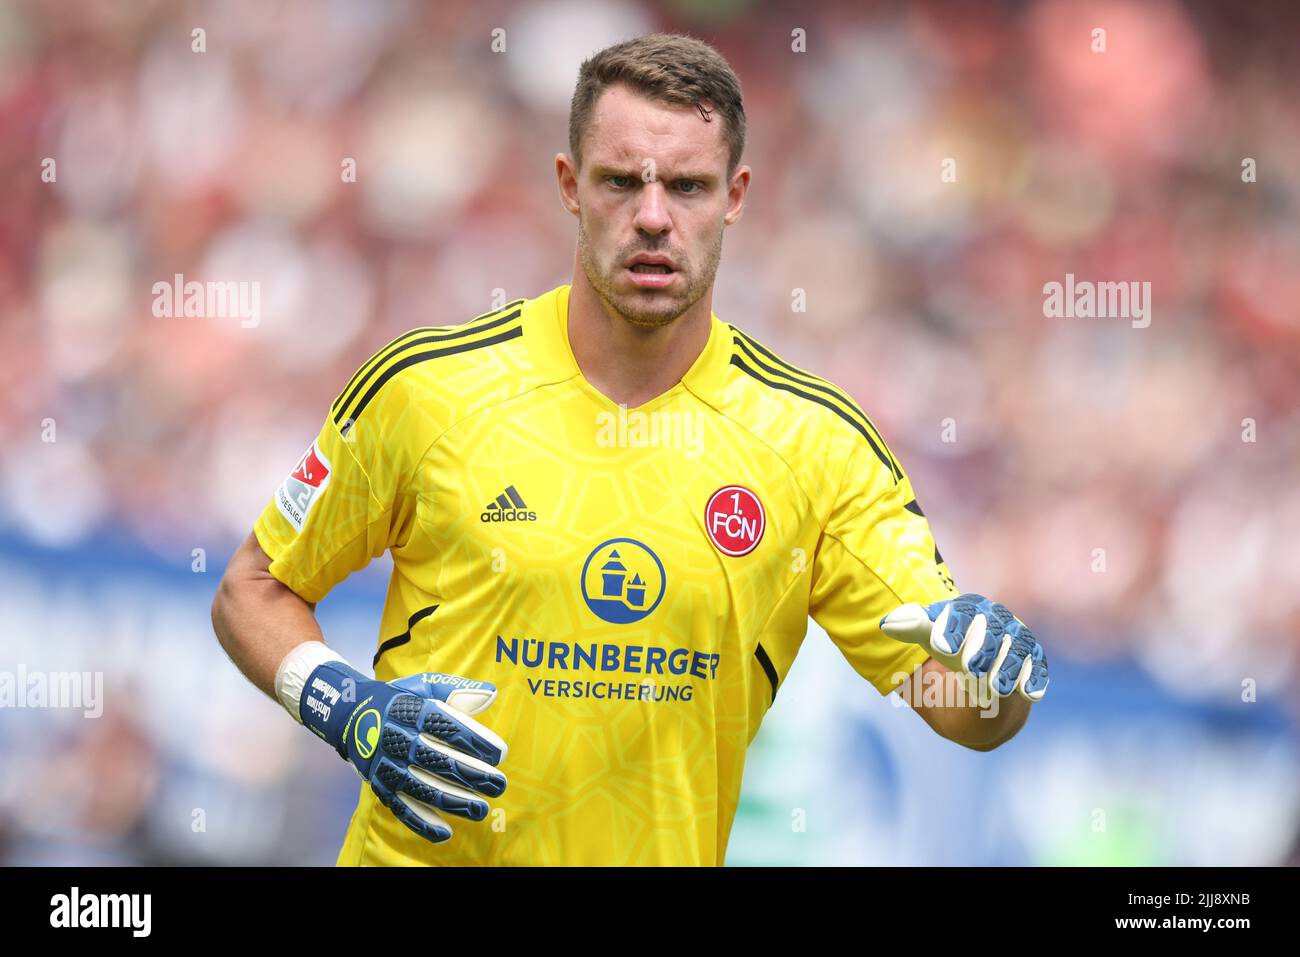 Nuremberg, Germany. 23rd July, 2022. Soccer: 2nd Bundesliga, 1. FC Nuremberg - SpVgg Greuther Fürth, 2nd matchday at Max Morlock Stadium. Nuremberg goalkeeper Christian Mathenia. Credit: Daniel Karmann/dpa - IMPORTANT NOTE: In accordance with the requirements of the DFL Deutsche Fußball Liga and the DFB Deutscher Fußball-Bund, it is prohibited to use or have used photographs taken in the stadium and/or of the match in the form of sequence pictures and/or video-like photo series./dpa/Alamy Live News Stock Photo